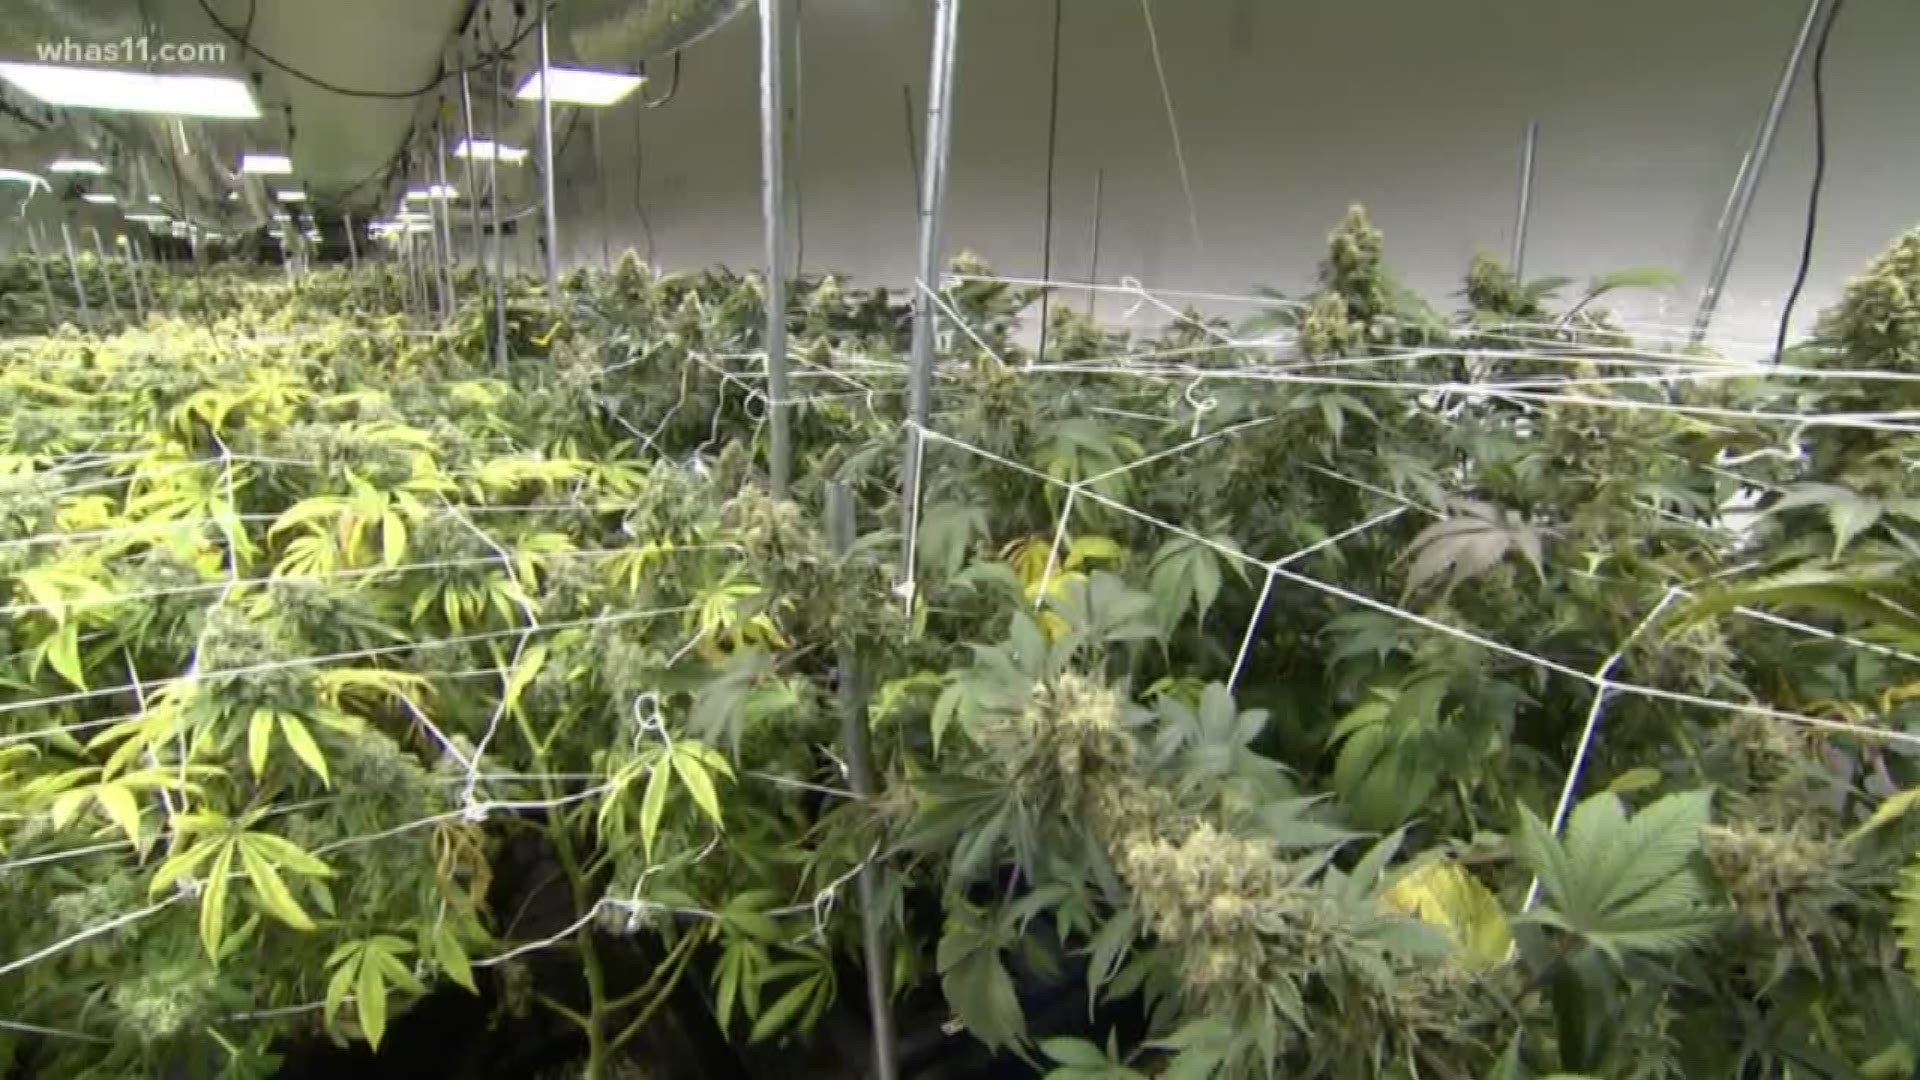 Lawmaker discusses medical marijuana bill now introduced in the Kentucky legeslative session.